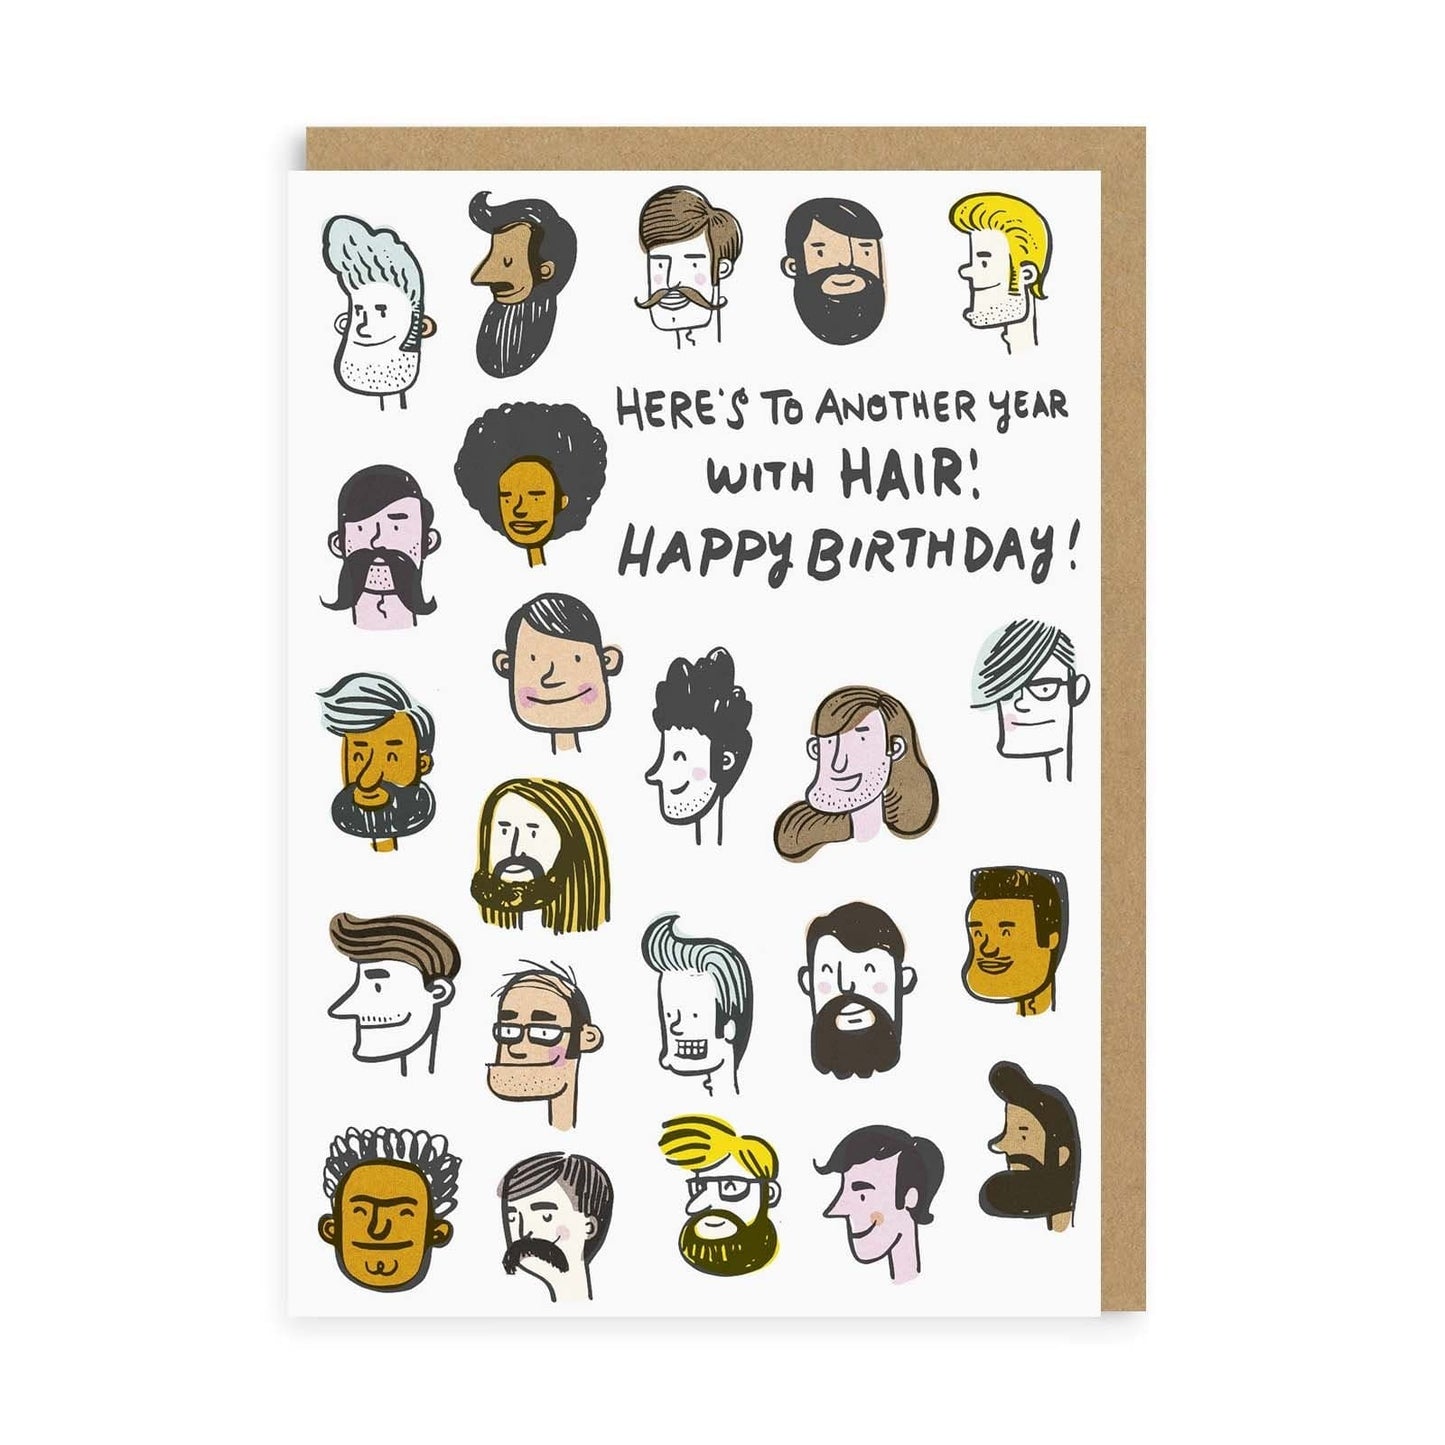 White birthday card with illustrated males faces with hair on head and black text